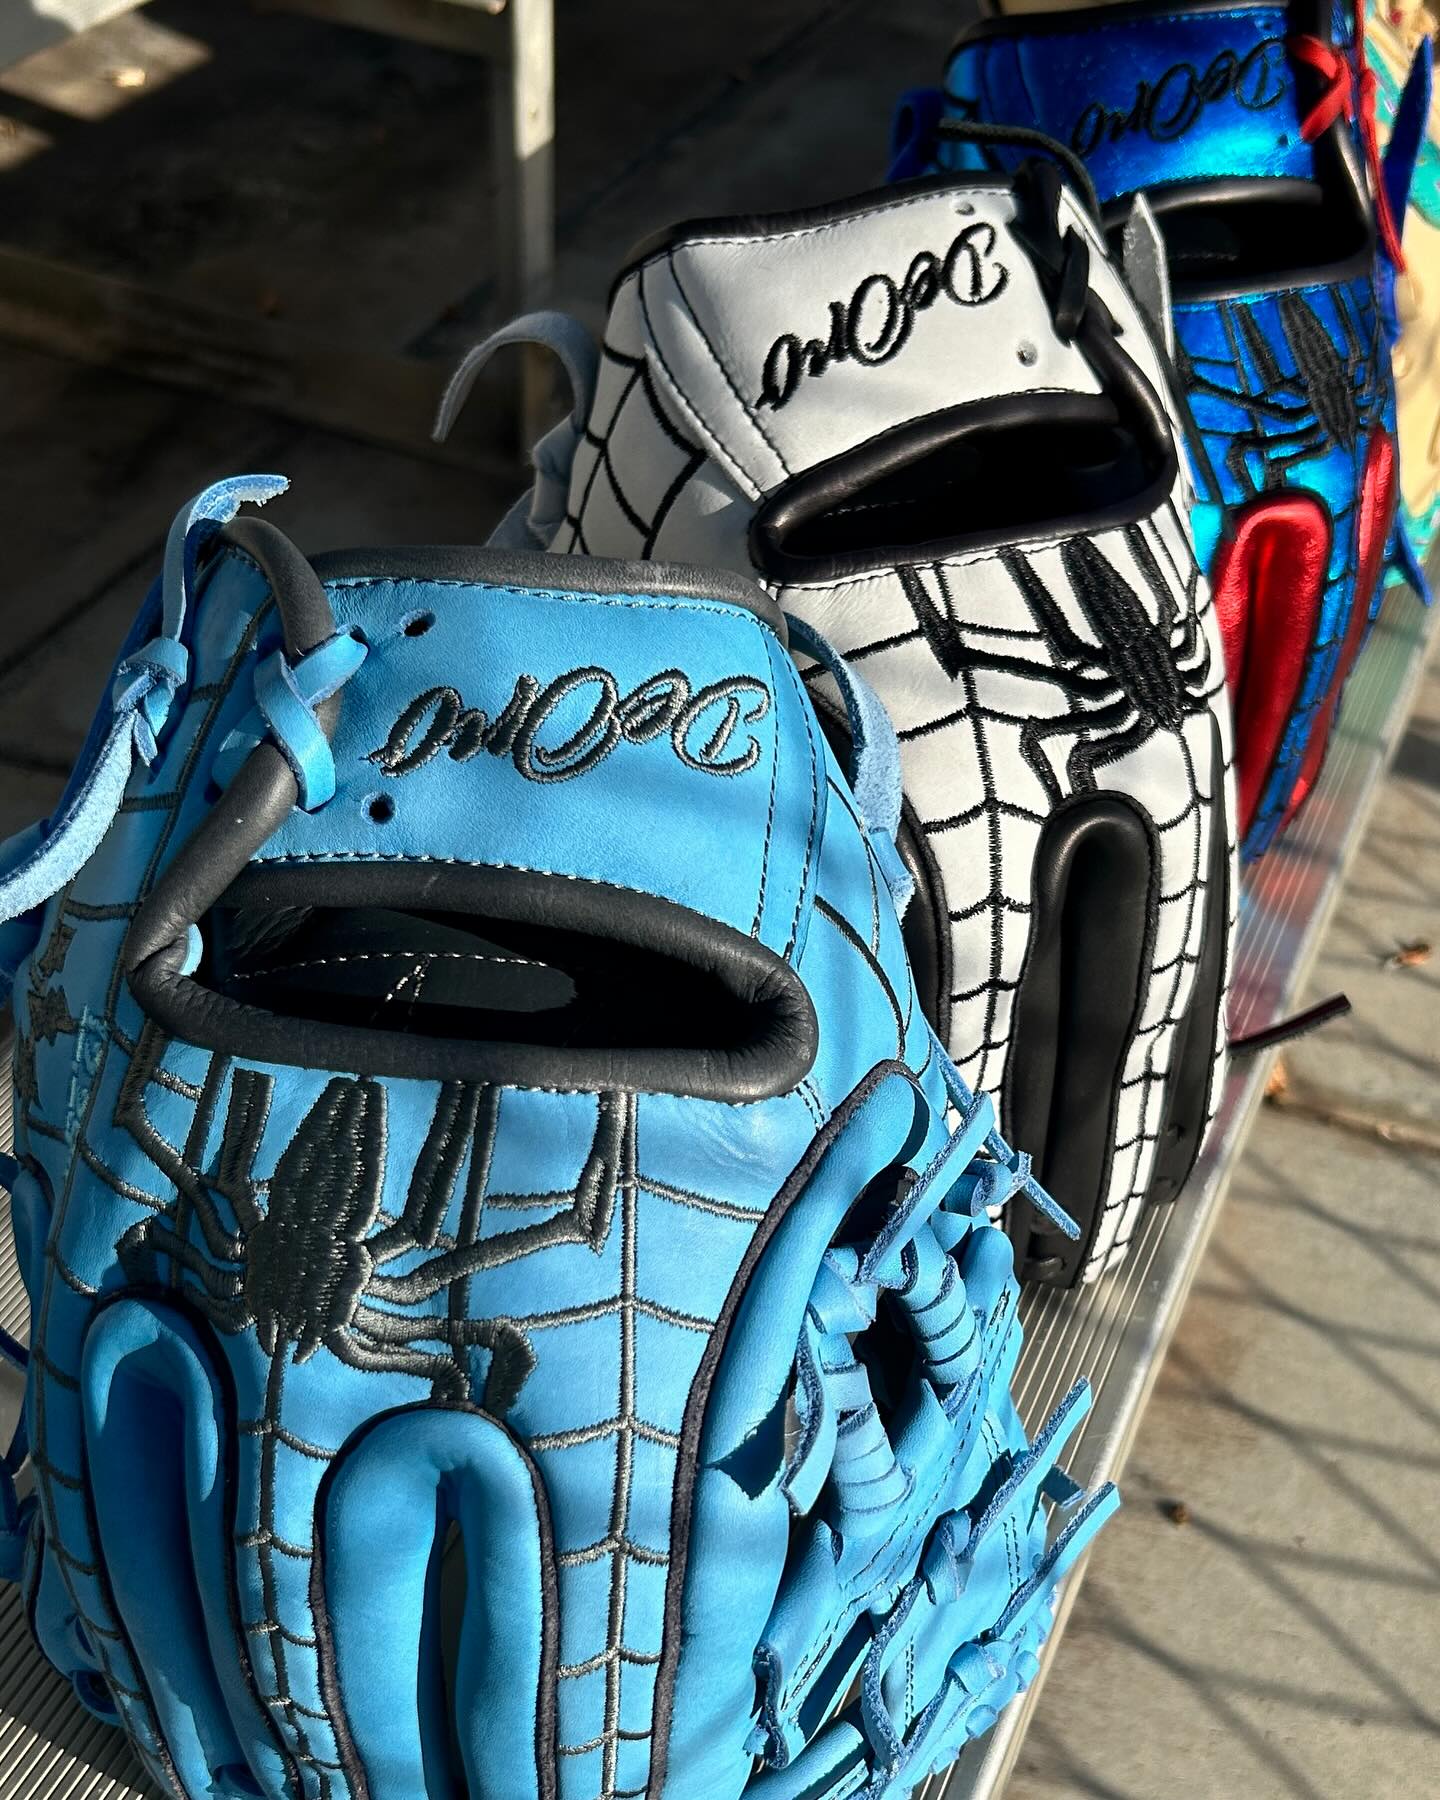 Web every ball with a DeOro Spider Glove! Design yours today at DeOroSports.com 

#BaseballGloves #SoftballGloves #Gloves #CustomGloves #ProGloves #CustomProGloves #ProCustomGloves #CustomBaseballGloves #CustomSoftballGloves #PersonalizedGloves #PersonalizedBaseballGloves #DeOro #DeOroSports #Sports #Baseball #Softball #Spider #SpiderGlove #CustomSpider